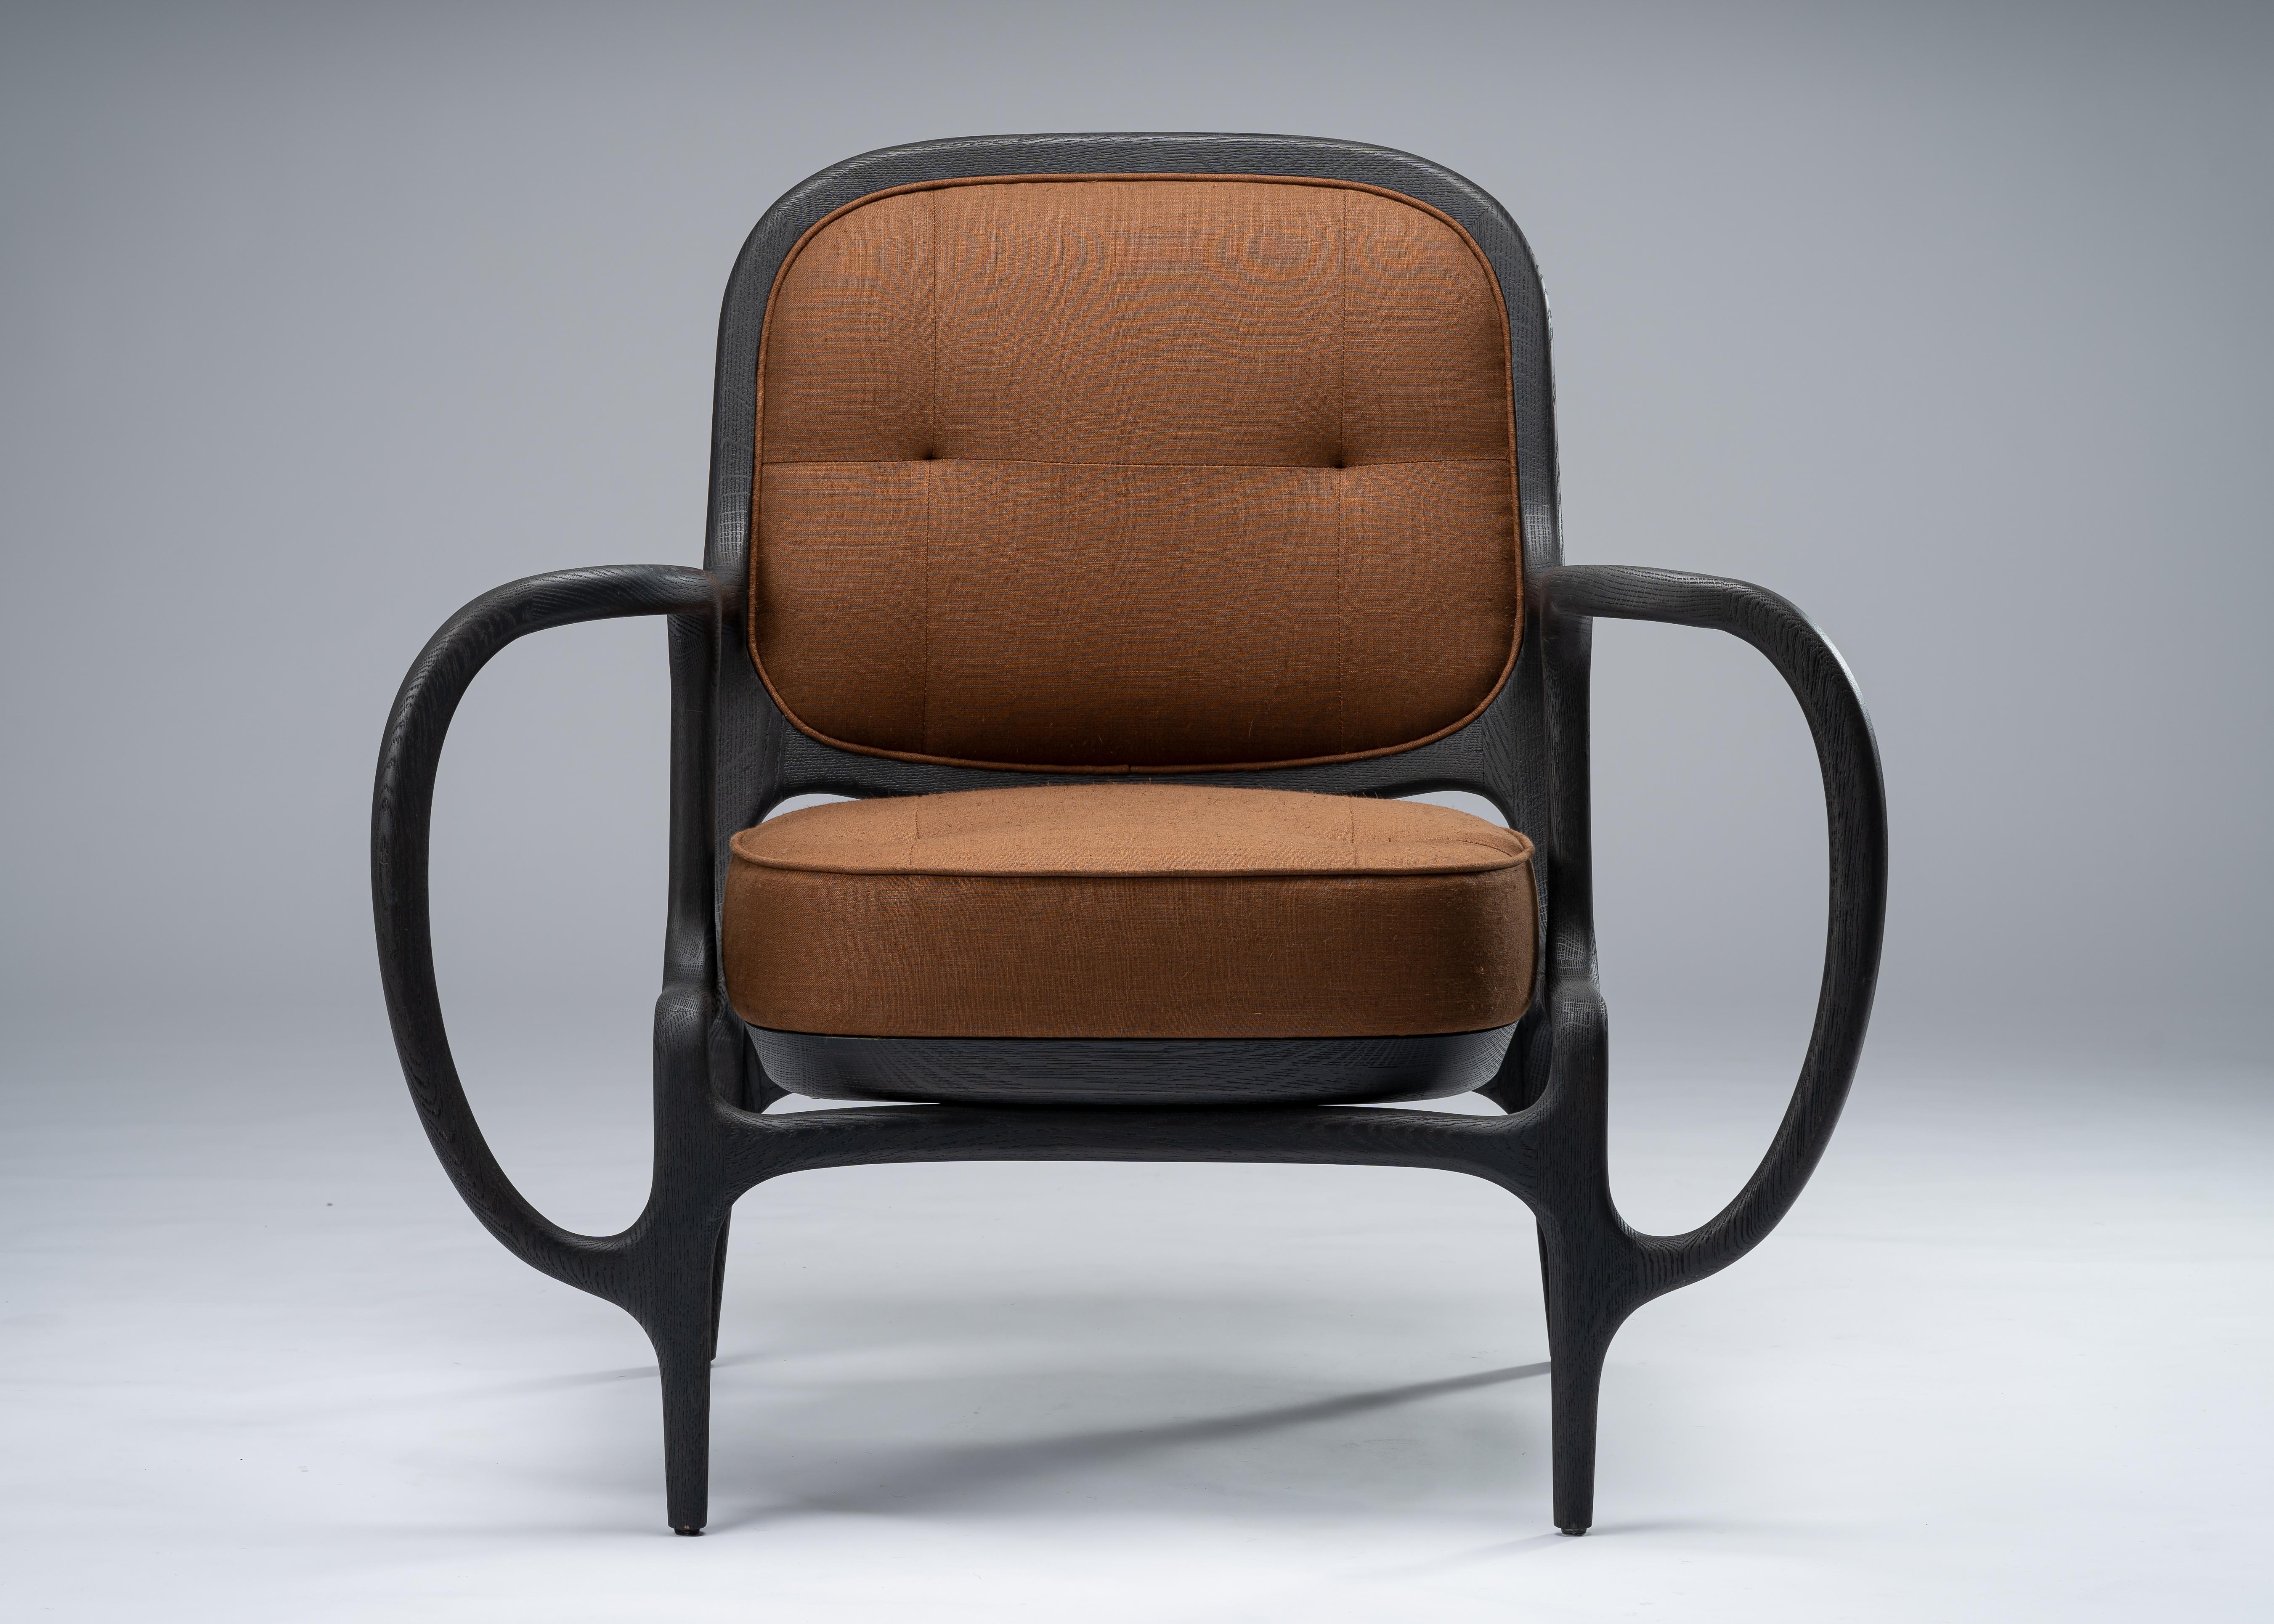 Vintage armchair in sandblasted oak with black/charcoal stain.
Upholstered in 100% (amber/ tobacco tones).
Excellent/ 'new' condition.
Rounded silhouette with deep seat and beautiful proportions.
Stunning find. 2 available.

Measures: 40